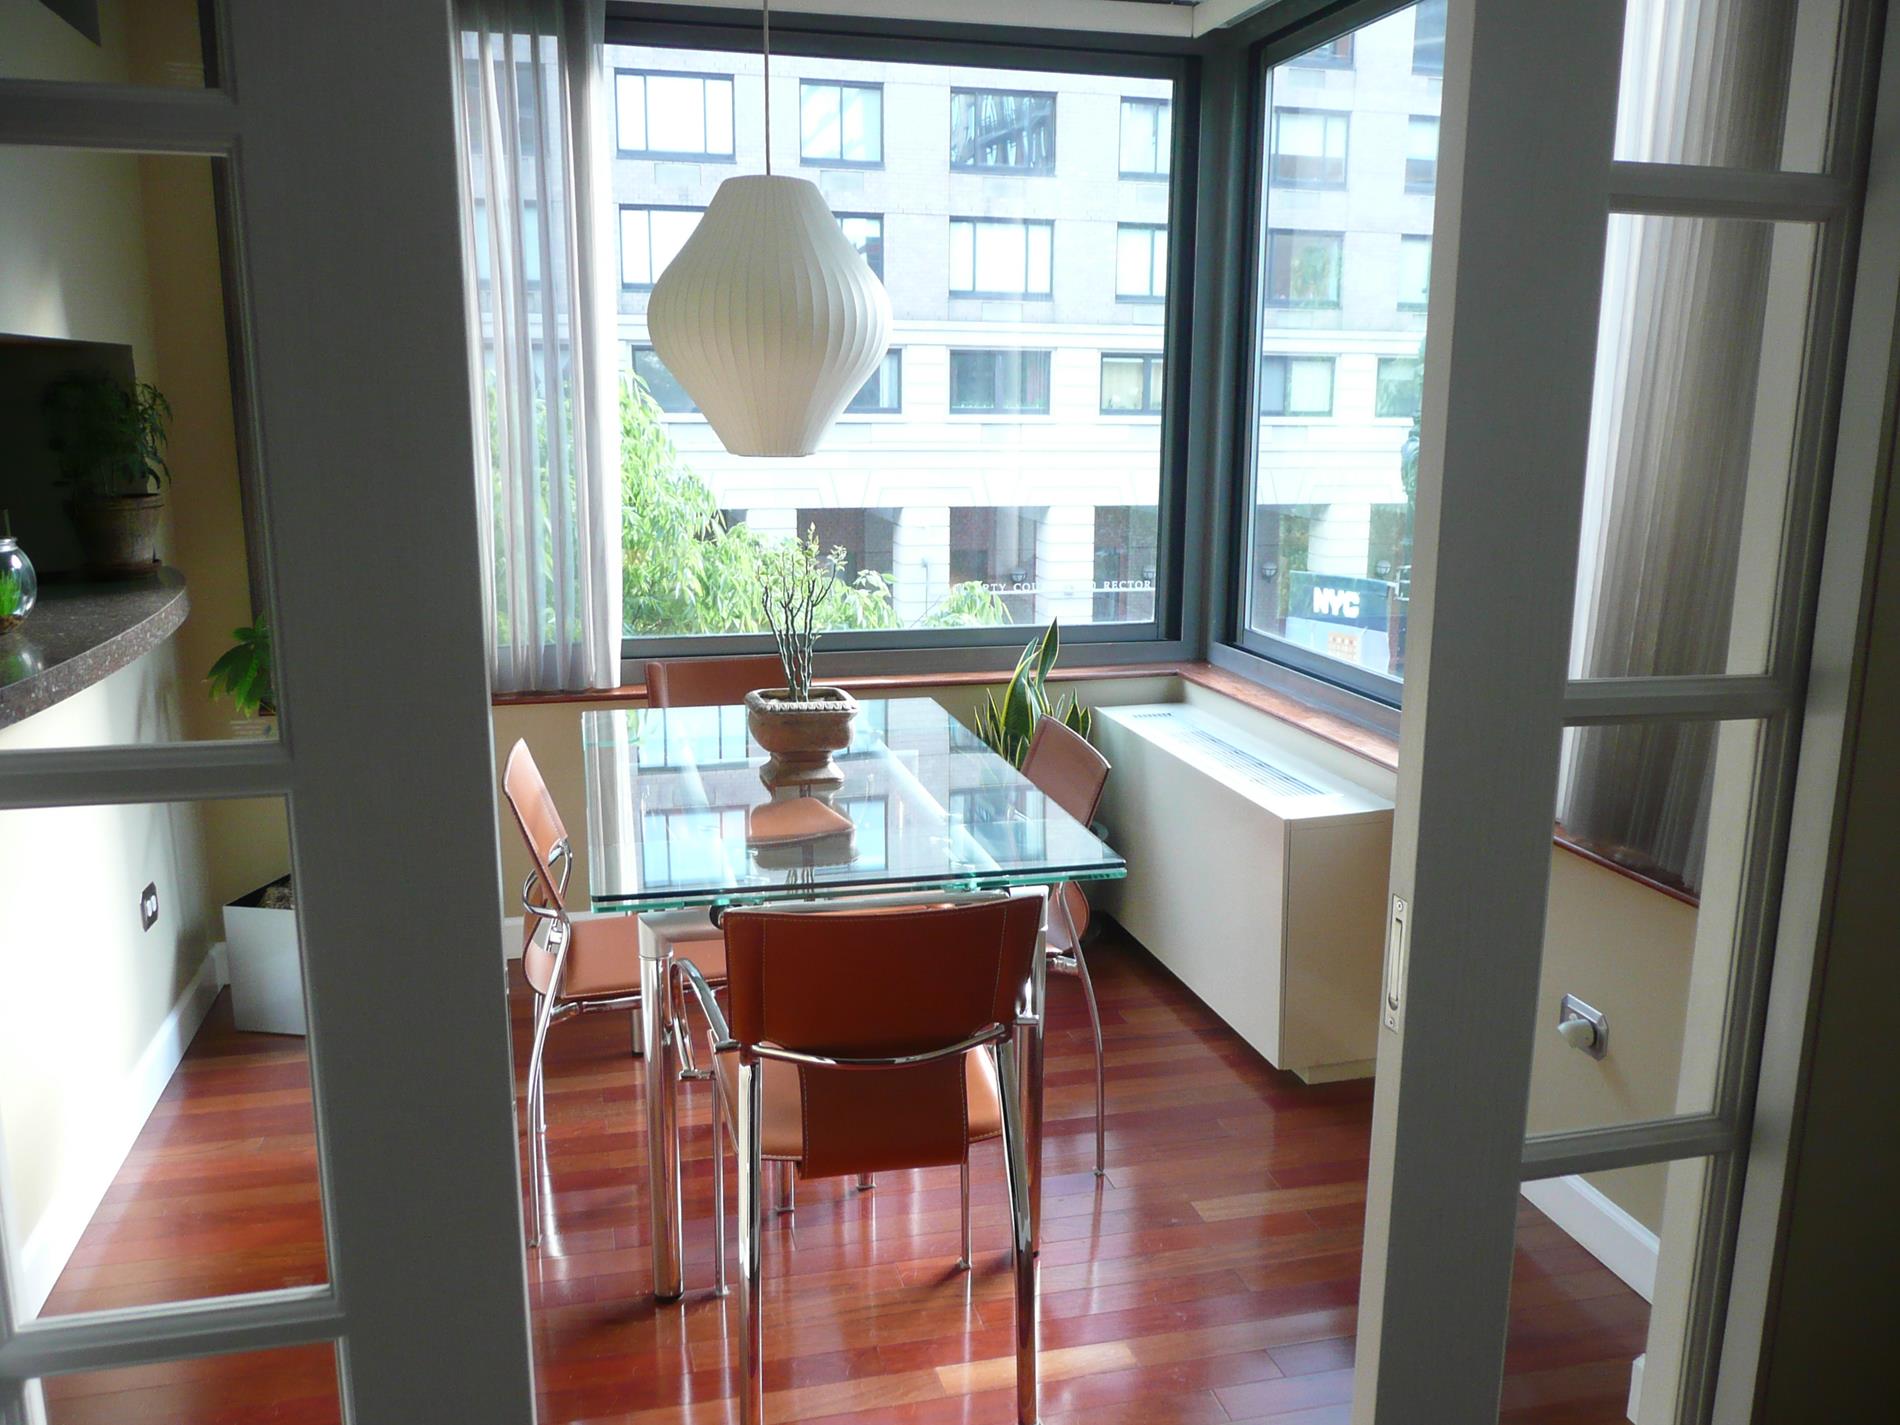 2 South End Avenue 3-I, Battery Park City, Downtown, NYC - 2 Bedrooms  
1 Bathrooms  
3 Rooms - 